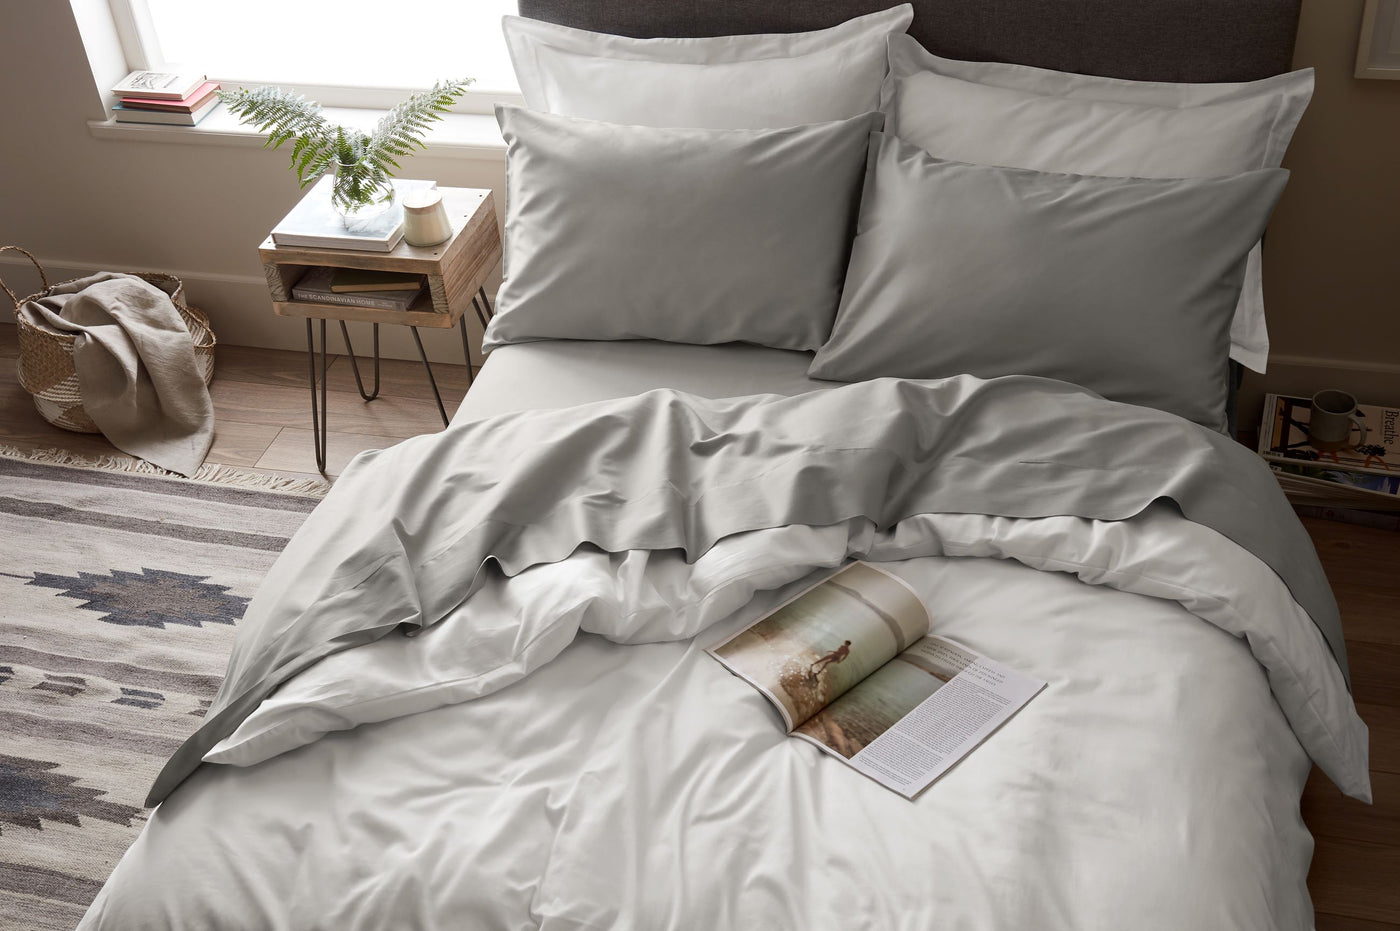 Luxury 100% Organic Cotton Bedding: Ethically-Made, Splendidly Soft and Fairly Priced.